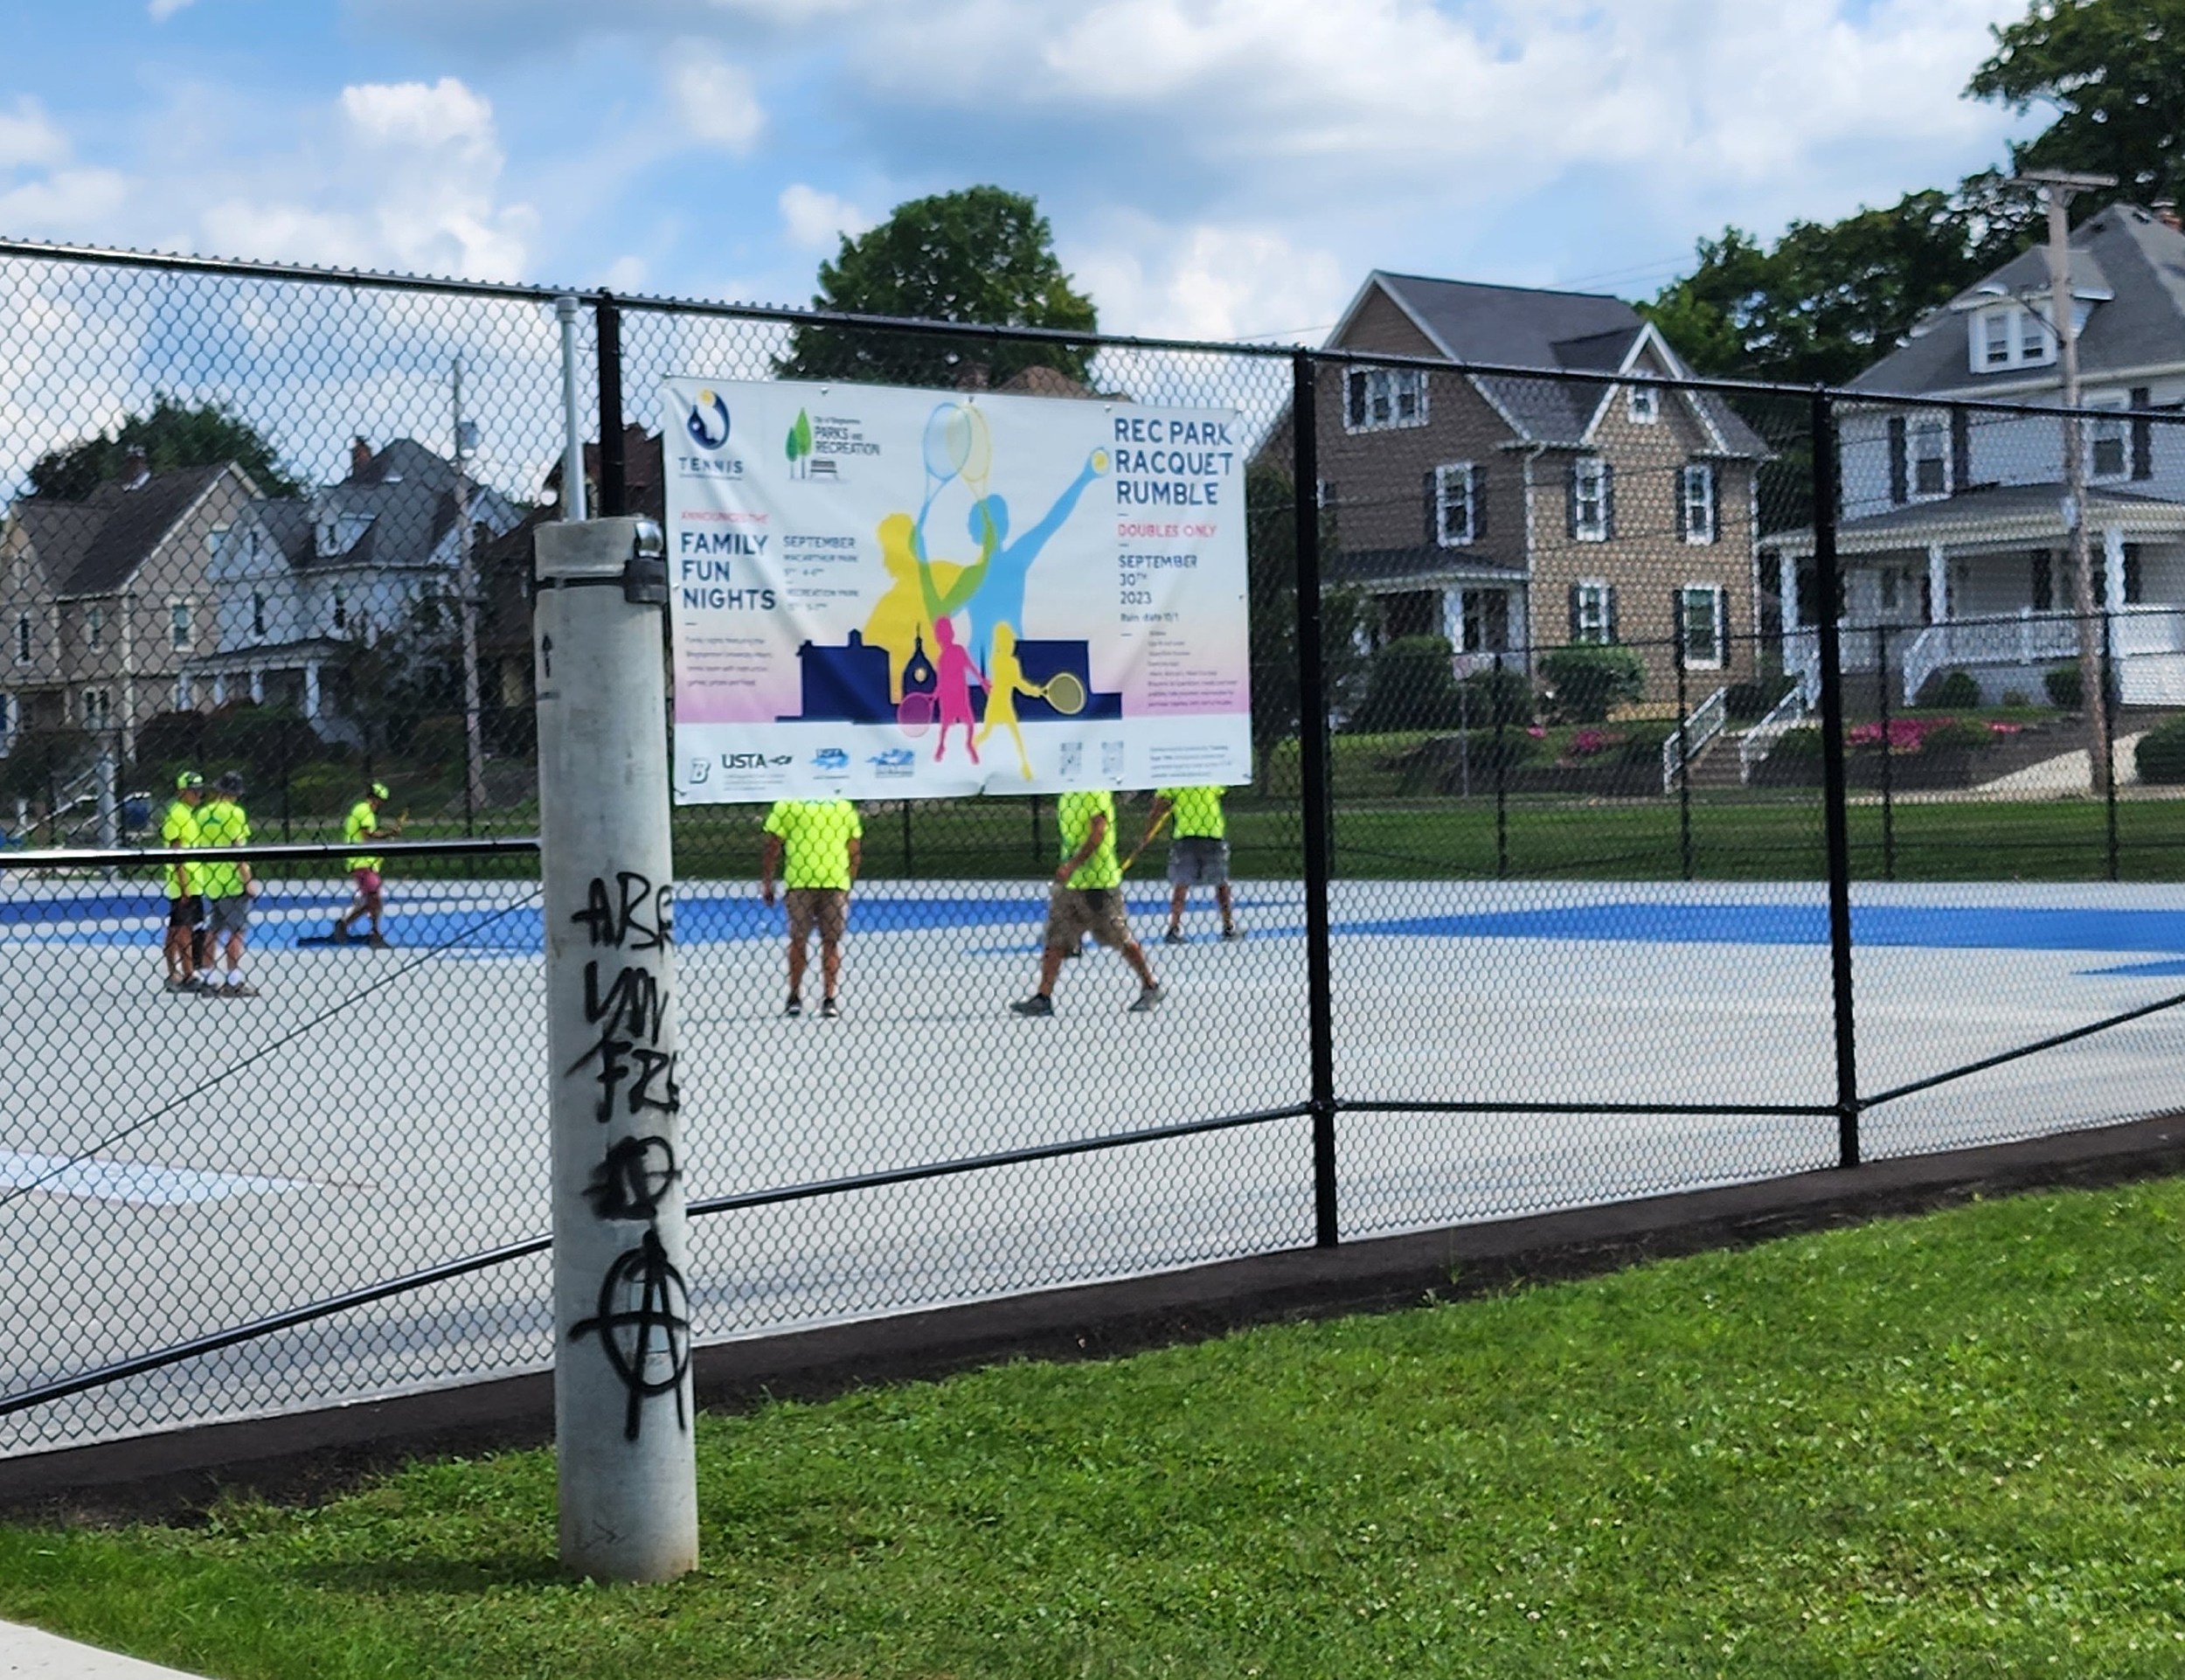 Rec Park Tennis Courts May Finally Open for Play This Month image